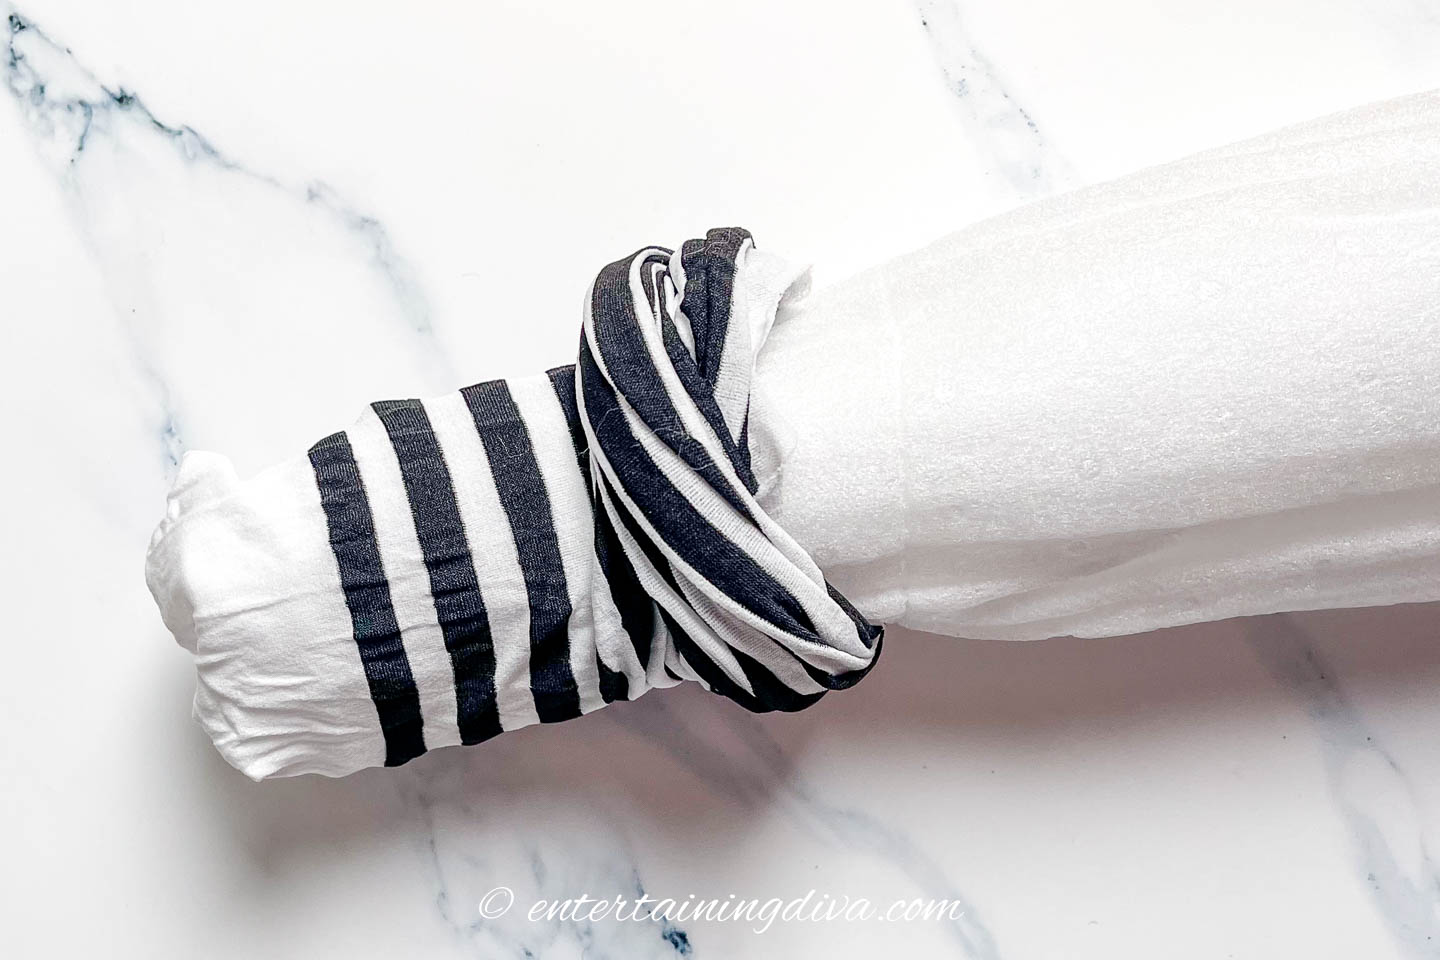 Pool noodle being inserted into a black and white striped stocking 